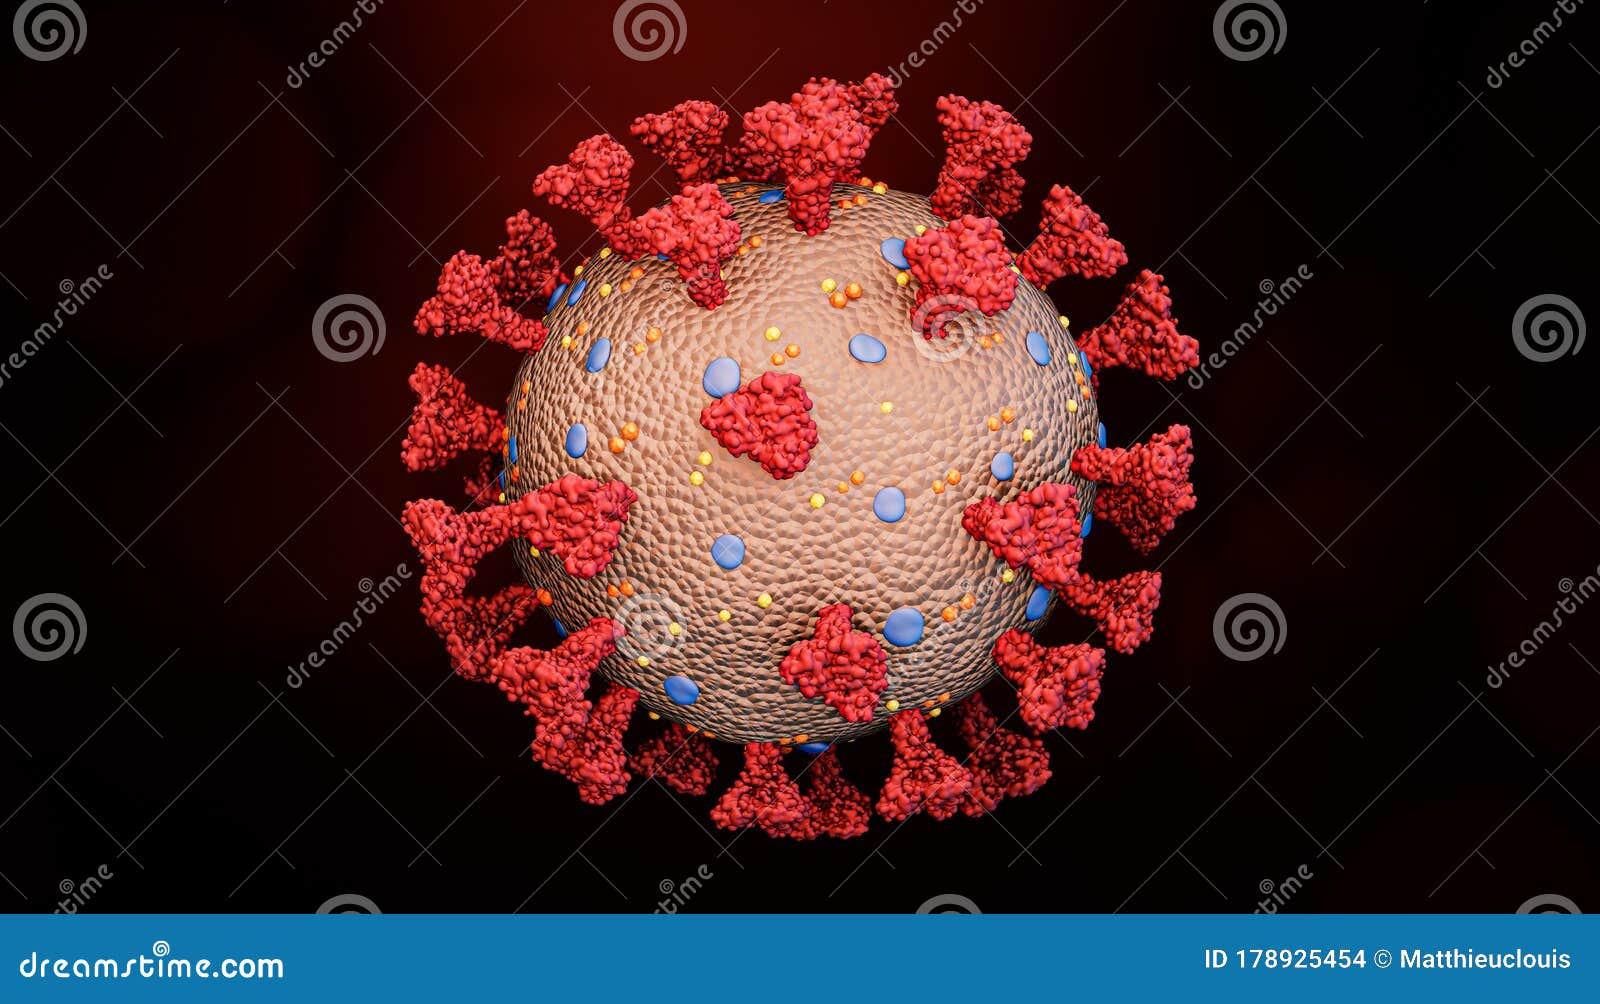 accurate scientific render of a coronavirus cell like covid or a flu virus structure with spikes glycoprotein, m proteins, e